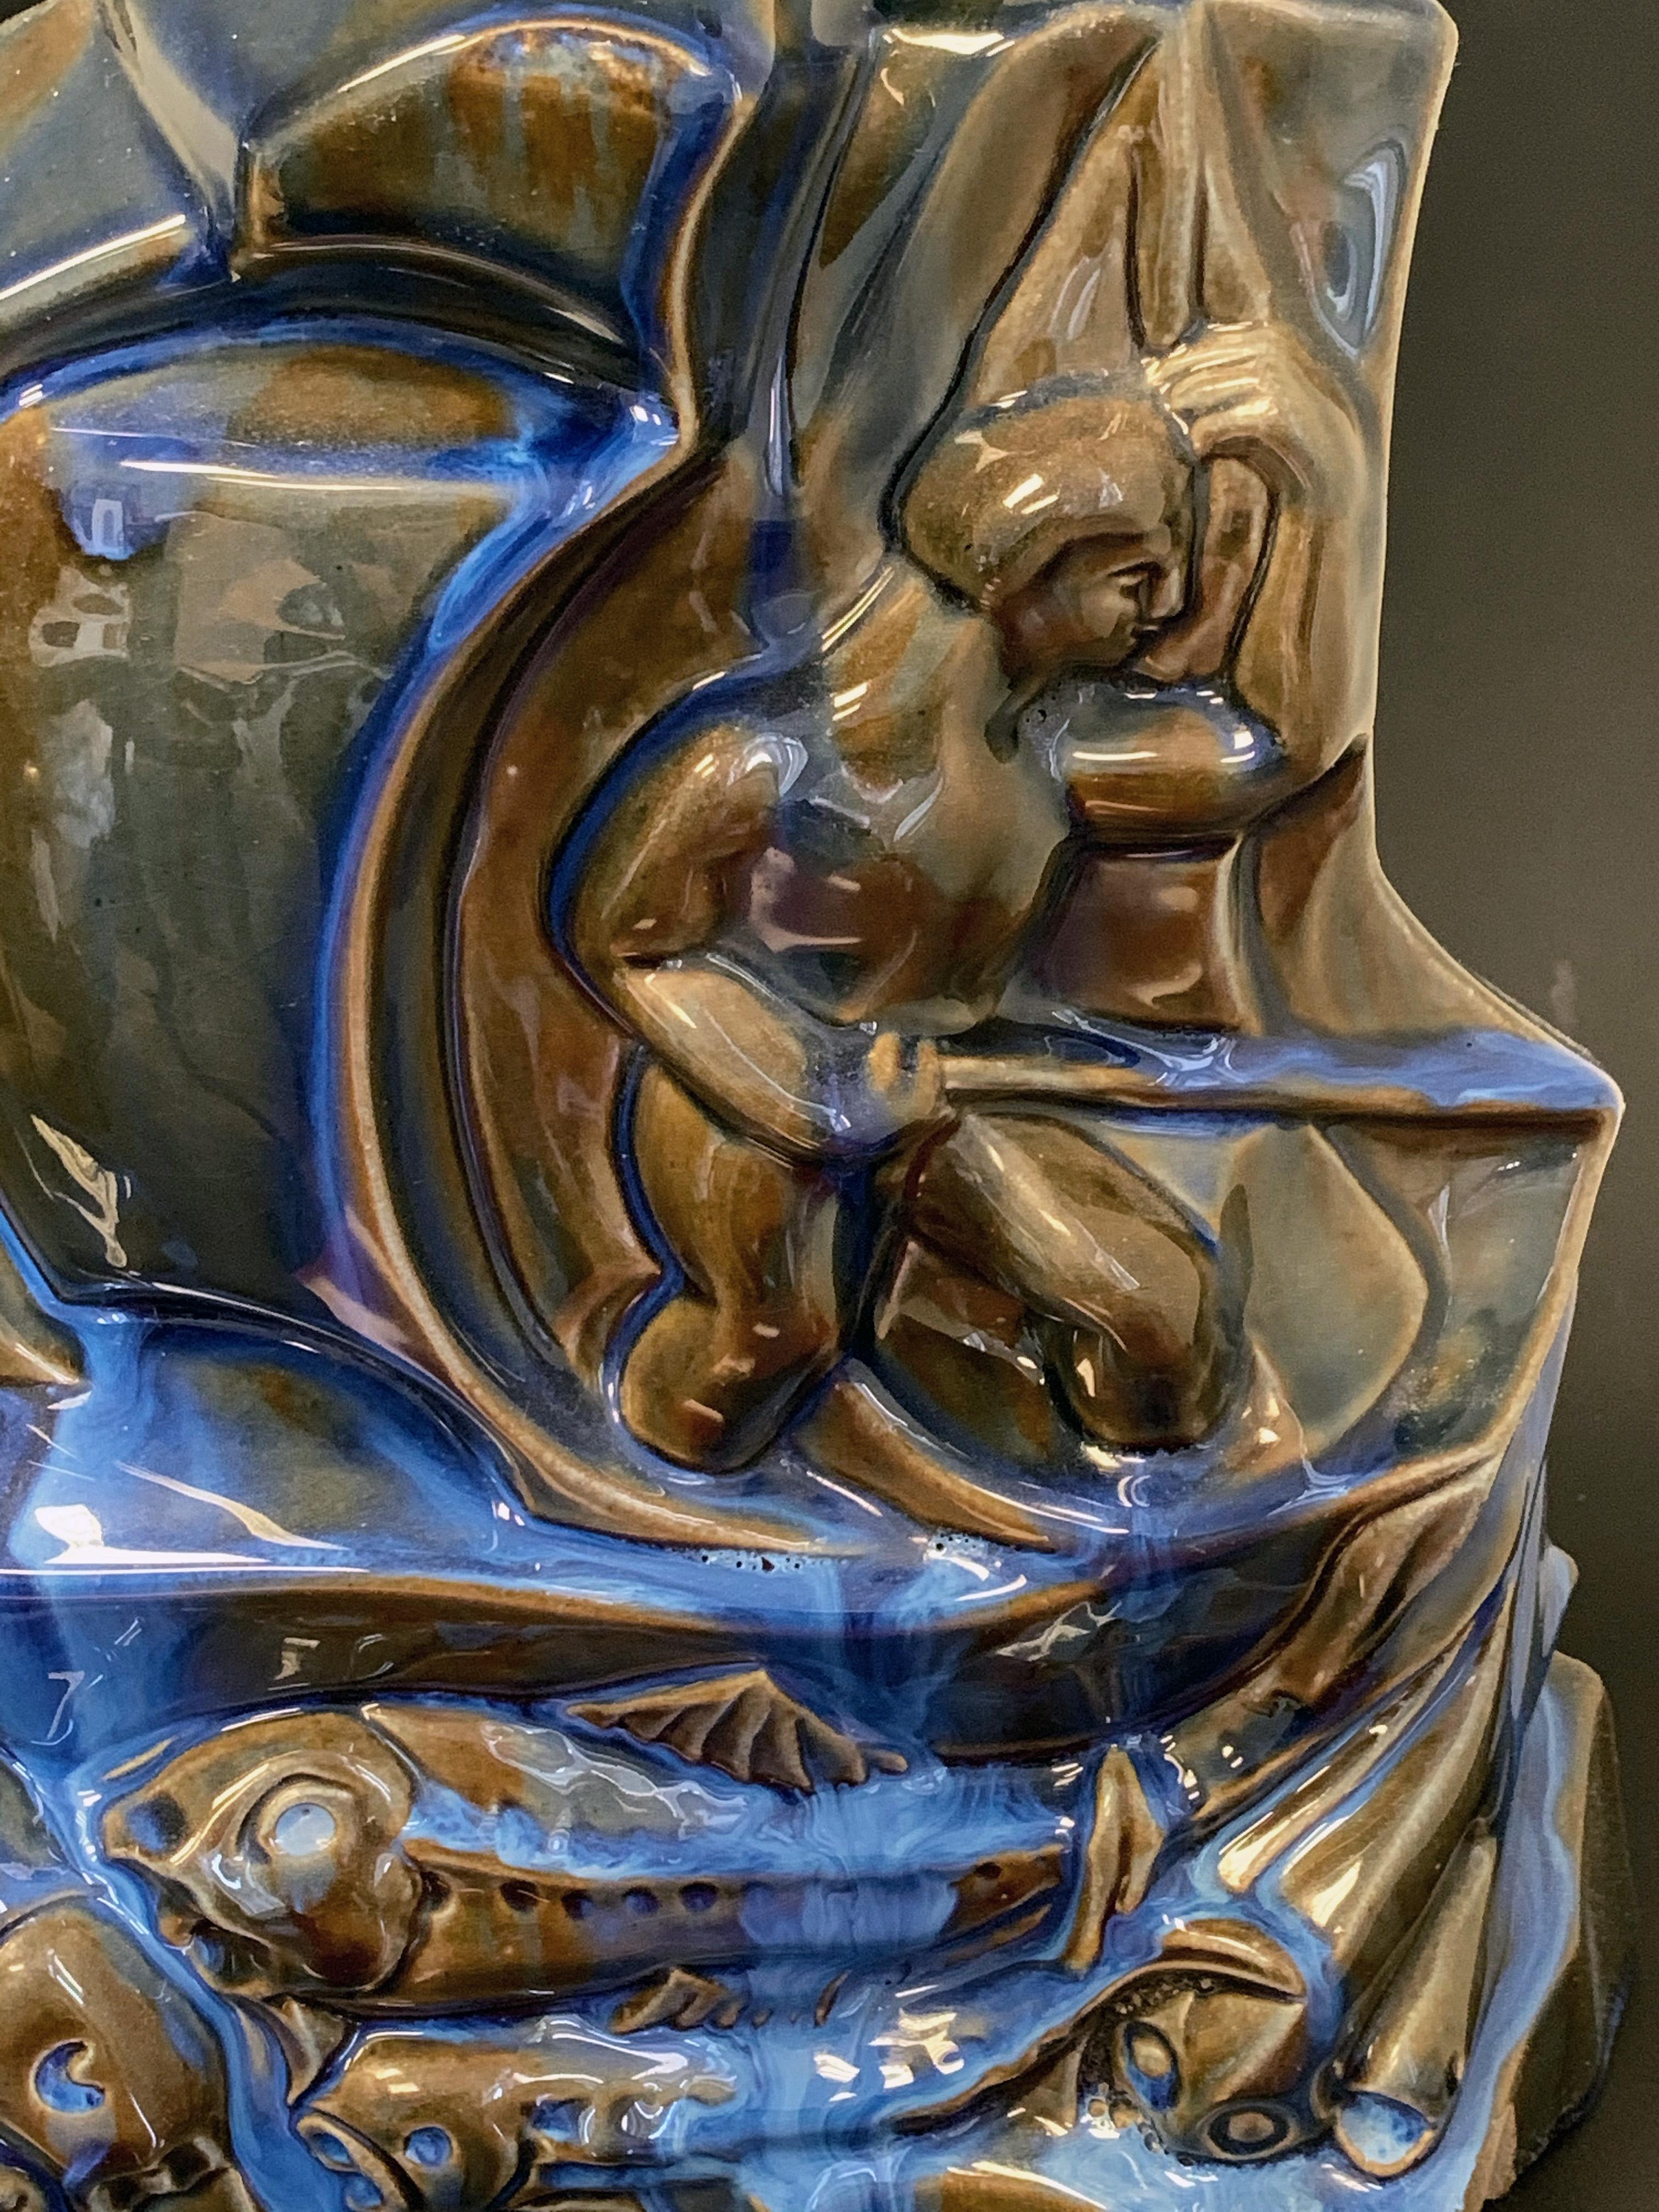 Rare and possibly unique, this extraordinary Art Deco sculpture is in the form of a sailing ship with a harpoonist on deck, the water below swarming with wide-eyed fish, all in navy blue, electric blue and olive drab glazes. The maker was Fulper